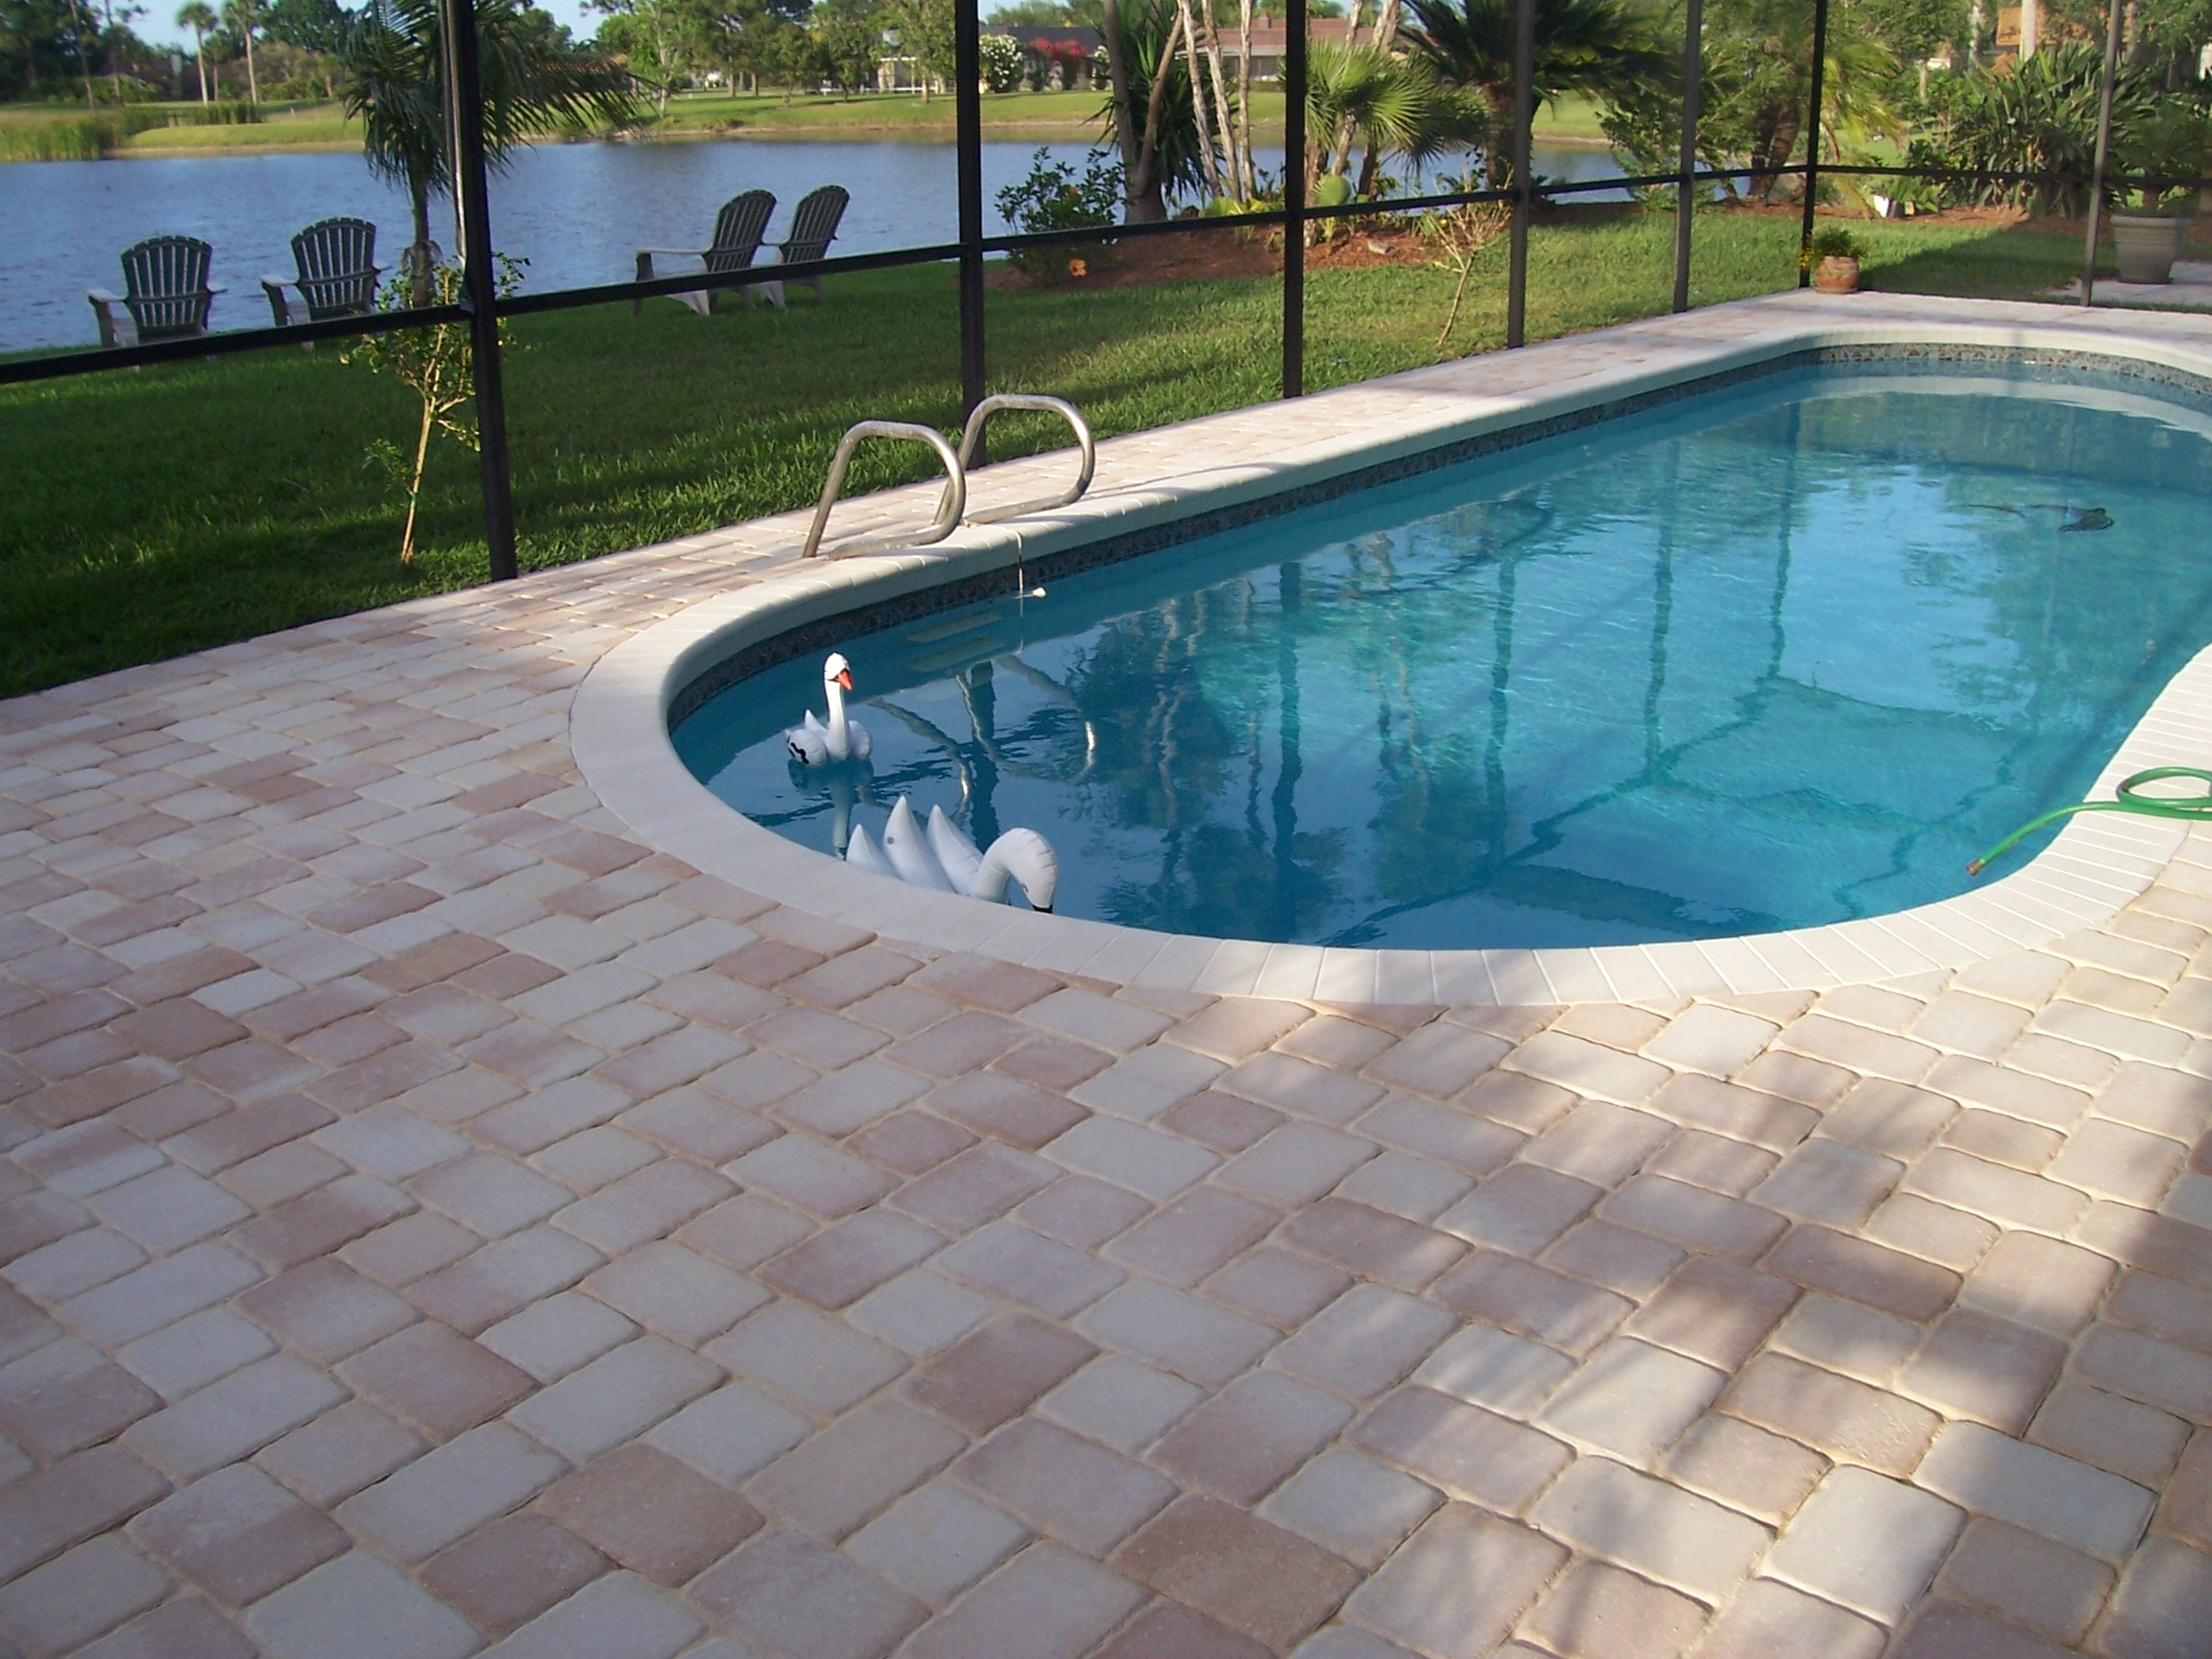 Pool Deck Pavers South Jersey Pool Paver Installation Nj intended for proportions 2304 X 1728